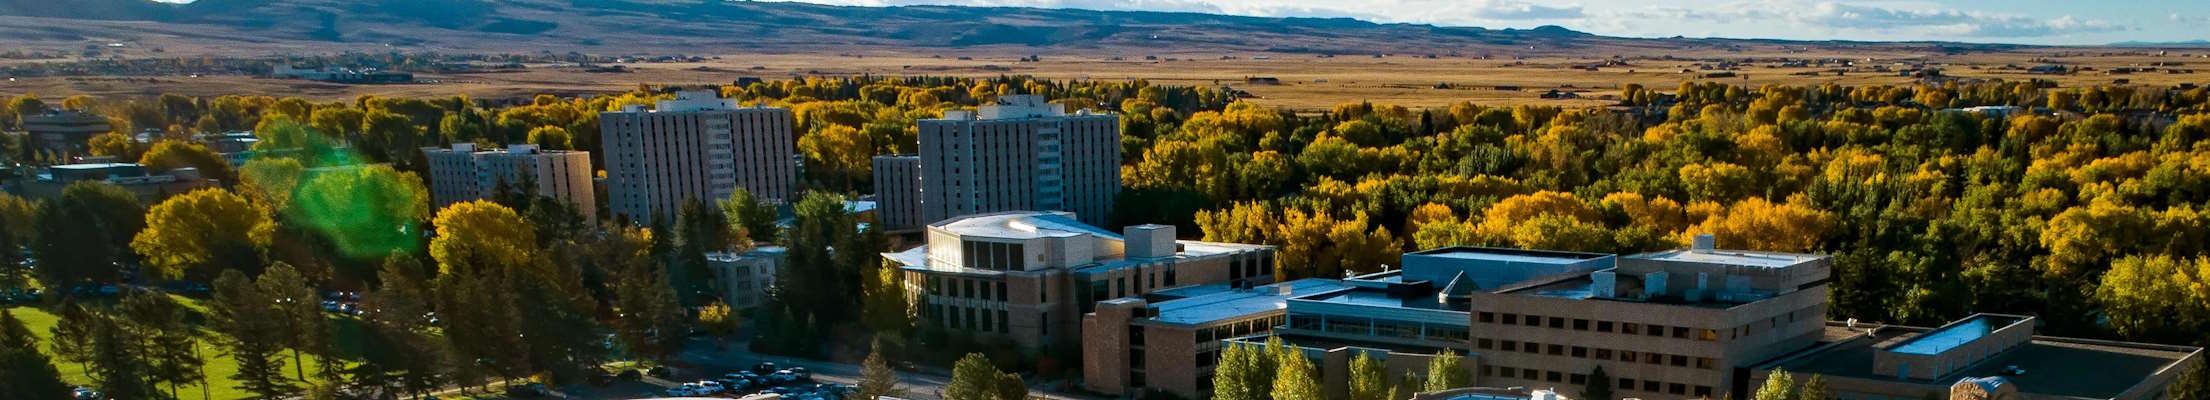 birds eye view of Coe Library on University of Wyoming campus